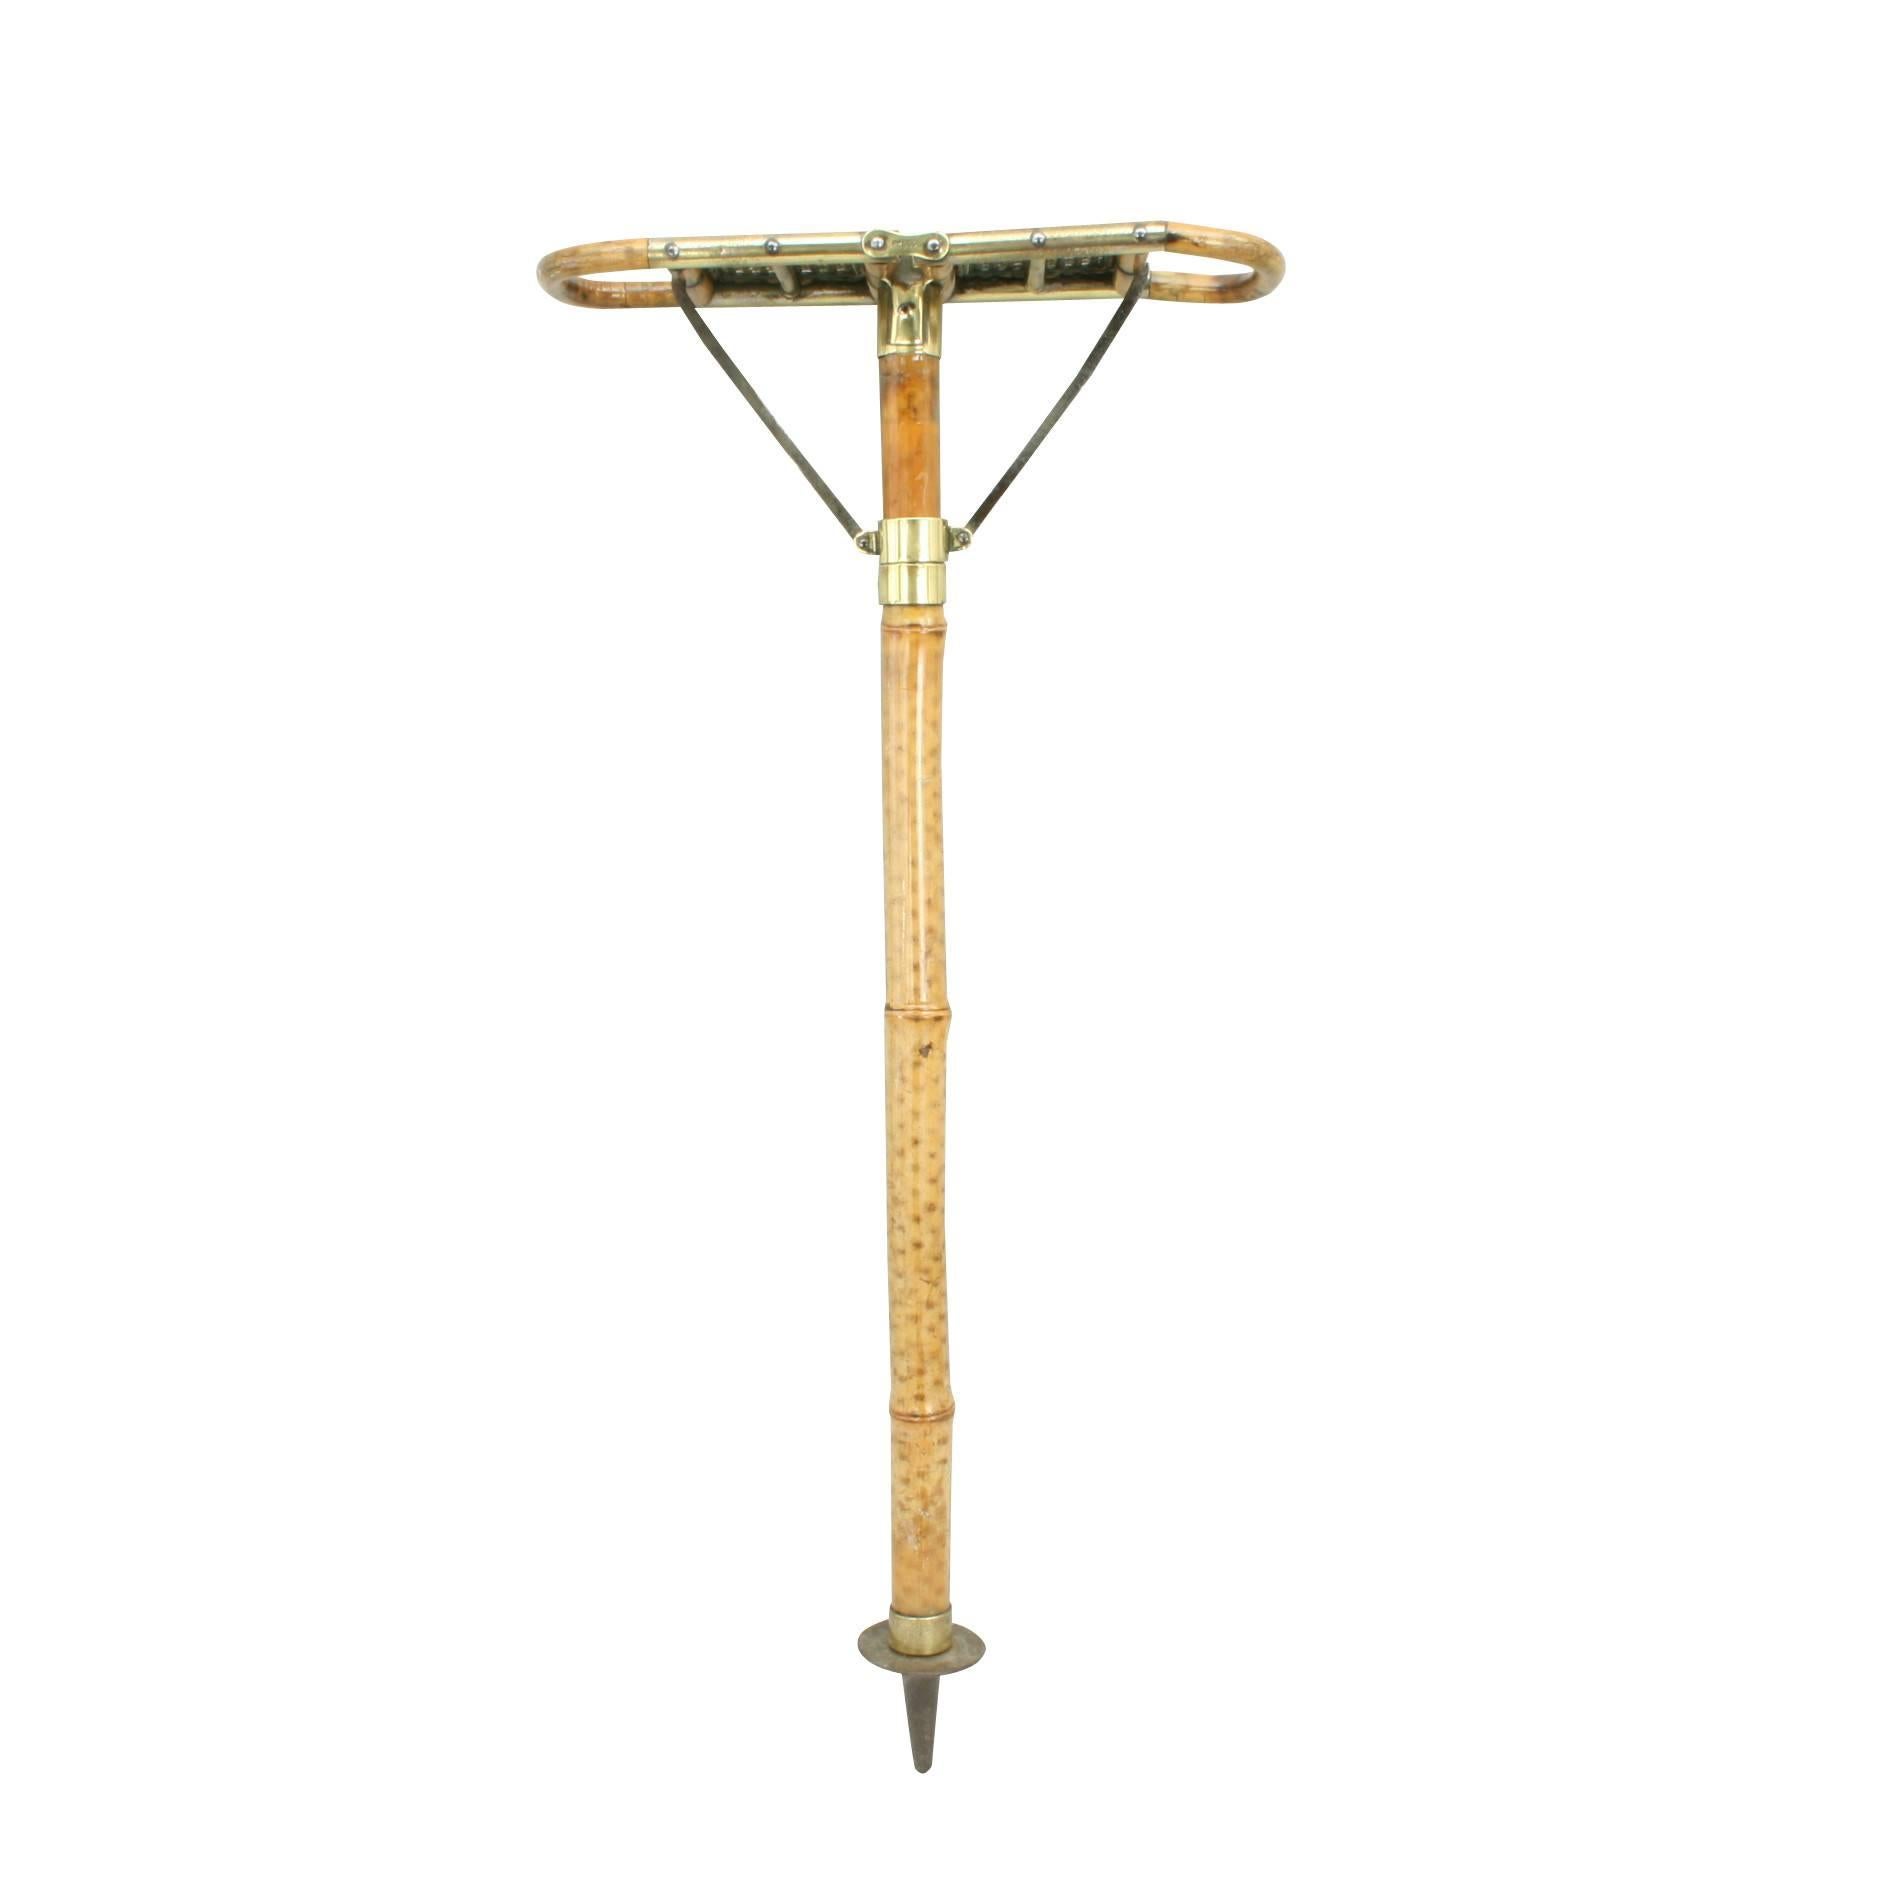 Antique bamboo shooting stick.
A good quality sports seat, shooting stick made of bamboo with folding cane seat and polished brass fittings. There is a metal disc on the bottom to support the seat in soft ground. The stick is in very good original